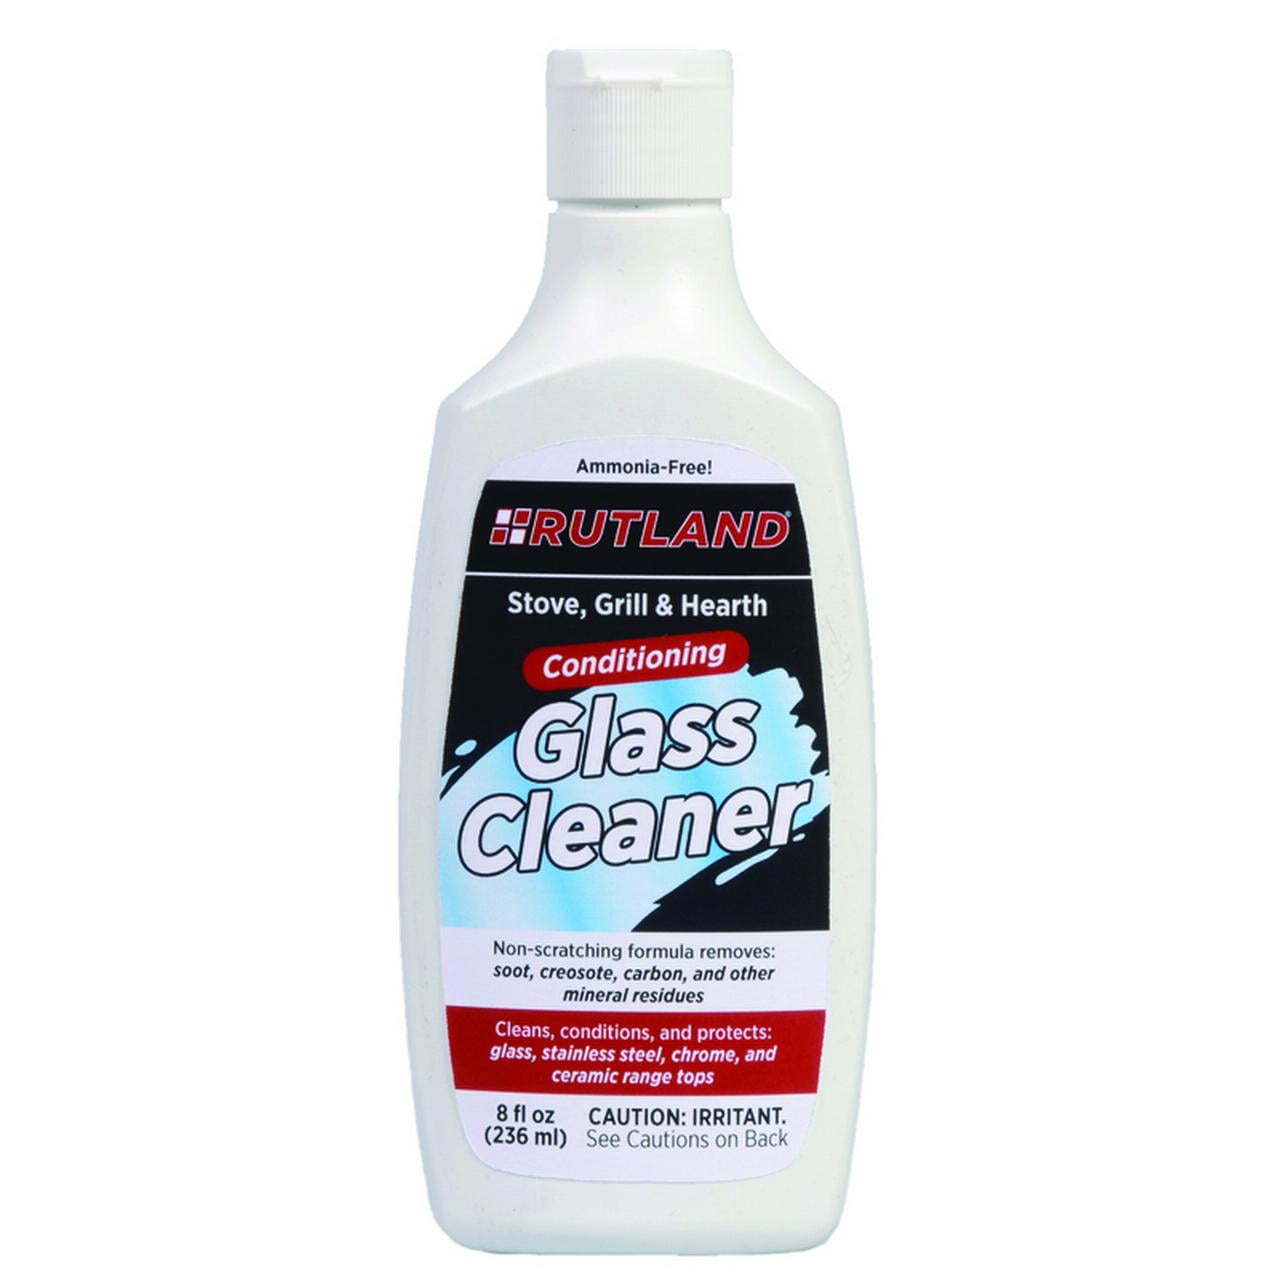 Meeco's Woodstove Glass Cleaner Test And Review 